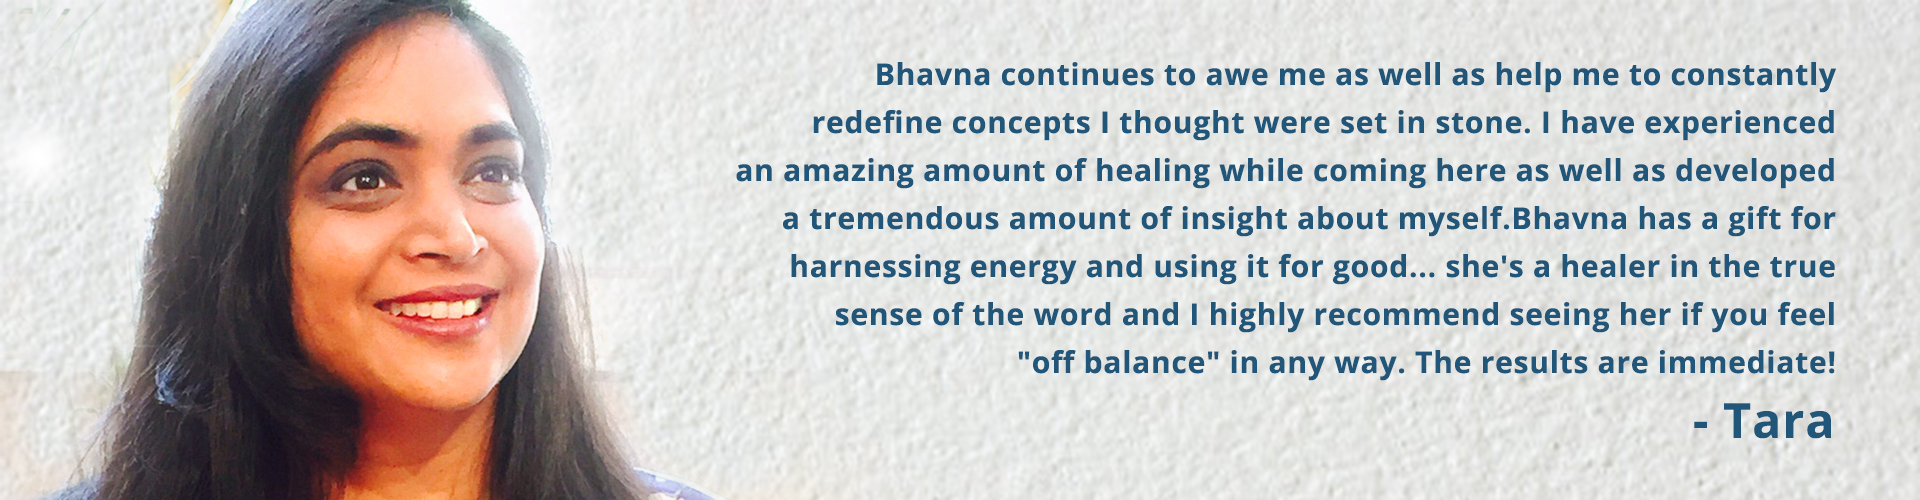 Bhavna, The Golden Light with testimonial about wellness experience